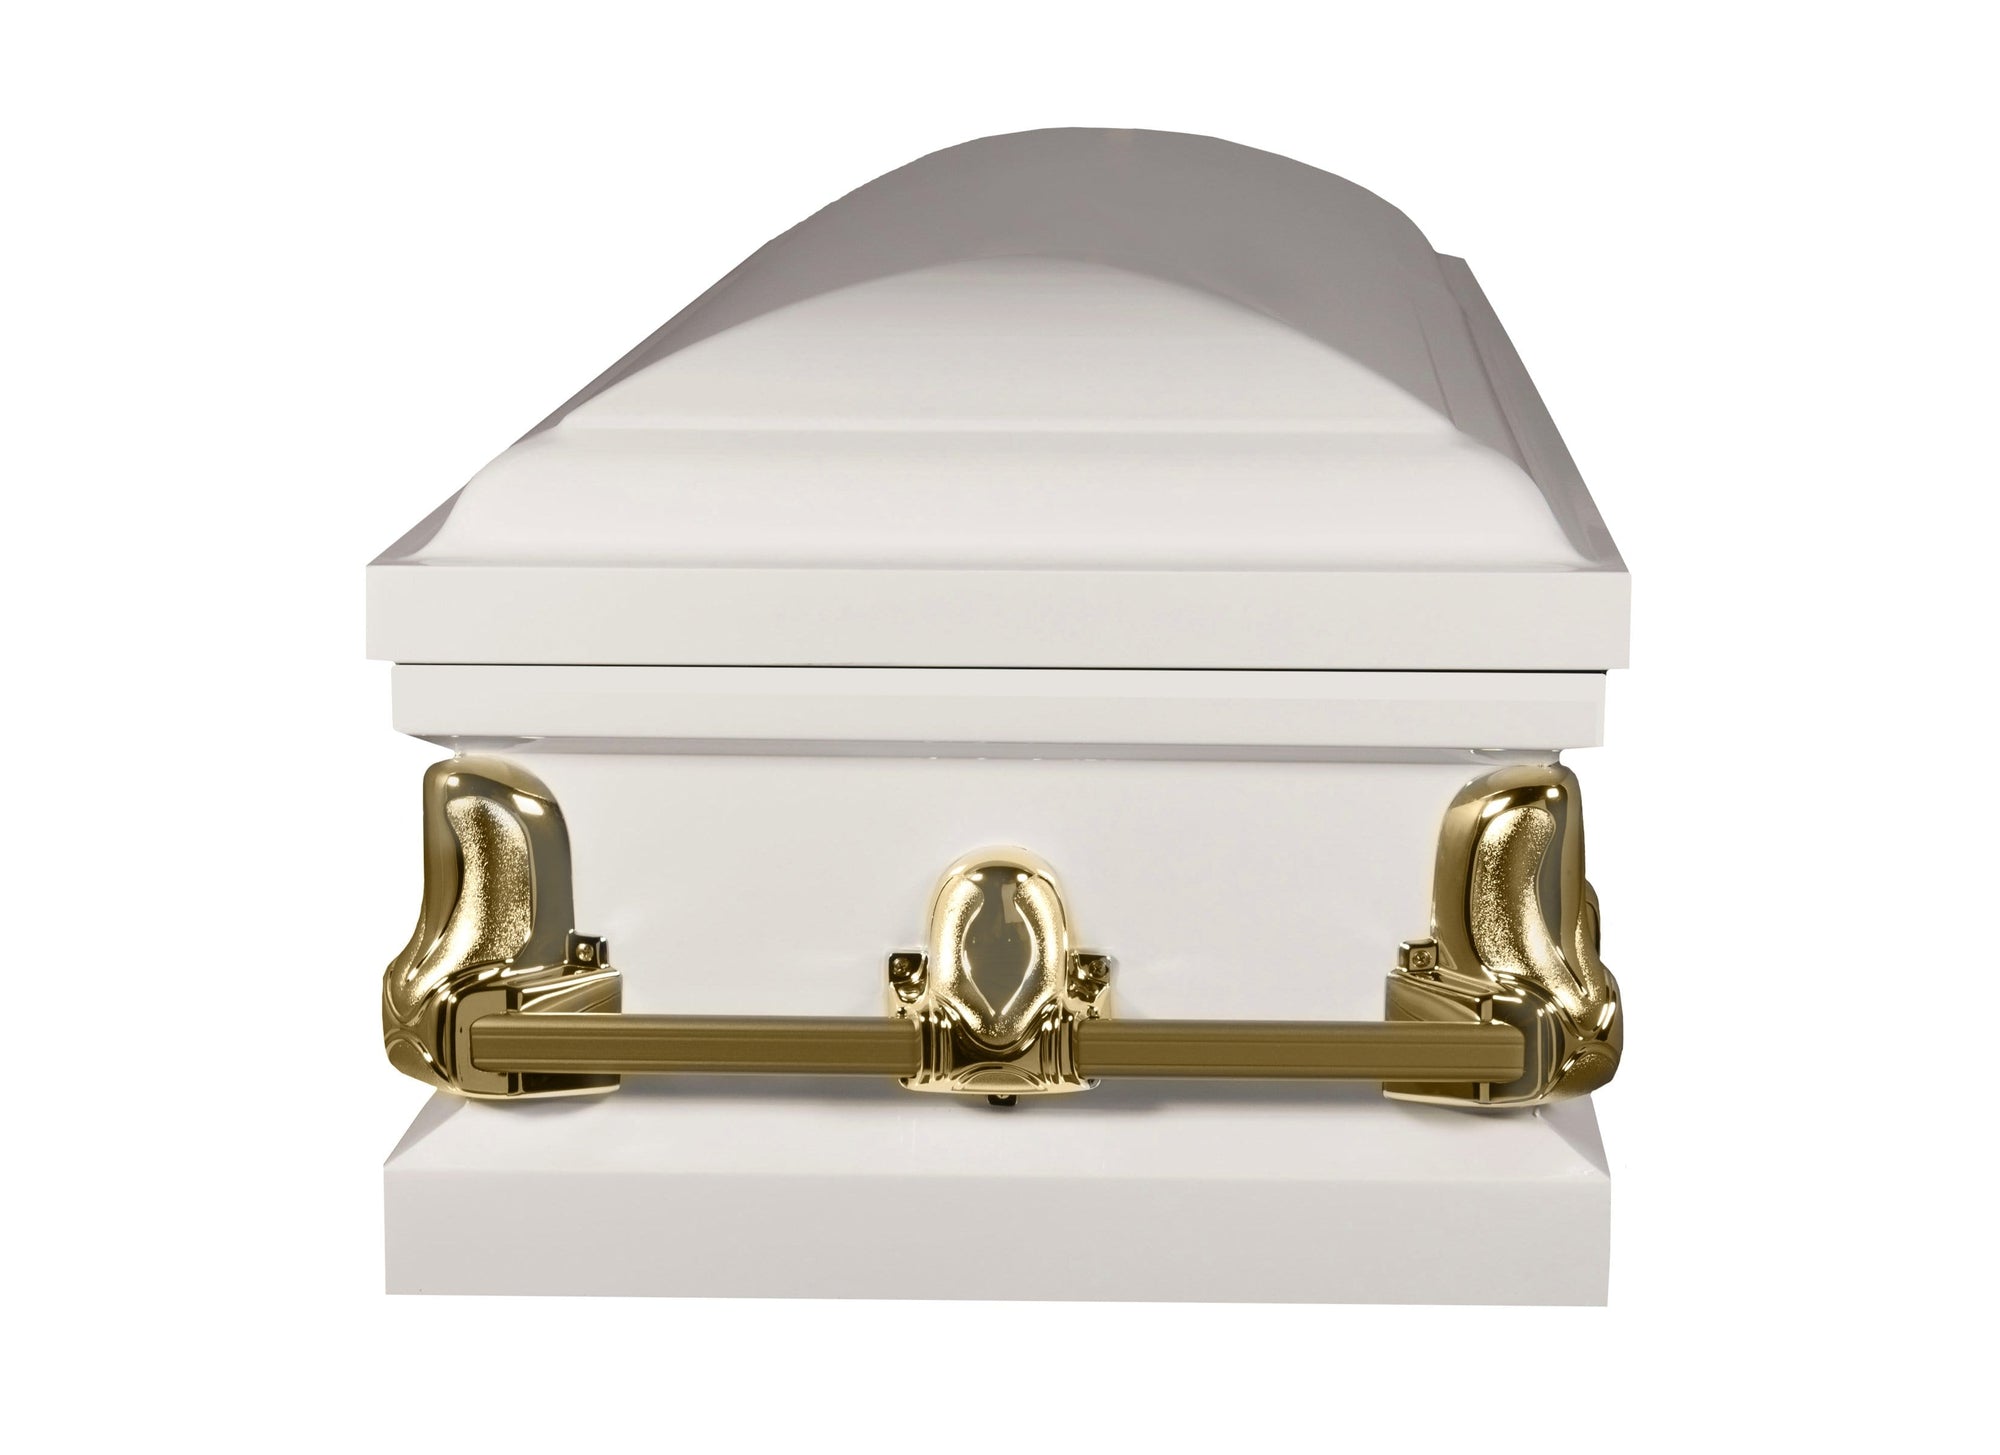 Load image into Gallery viewer, Orion Series | White and Gold Steel Casket with White Interior - Titan Casket
